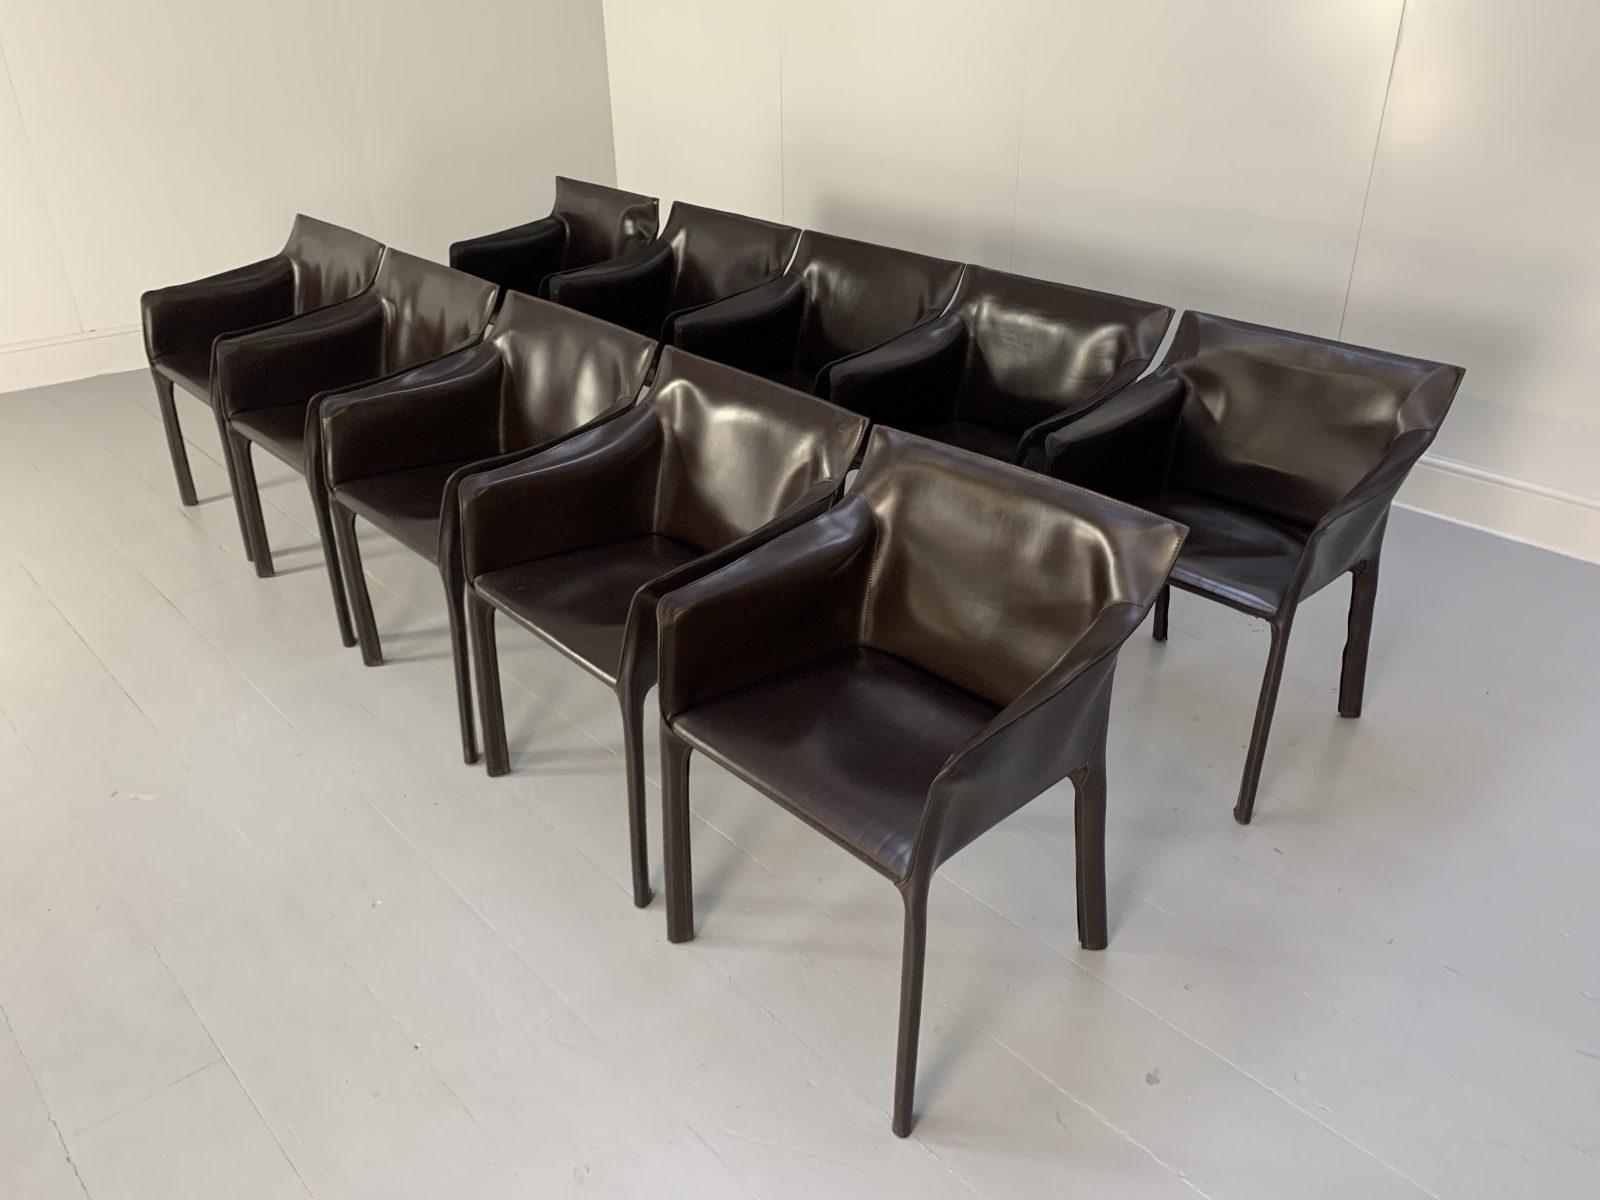 Contemporary 10 Matteo Grassi “Coco” Dining Chairs – in Brown Saddle Leather For Sale